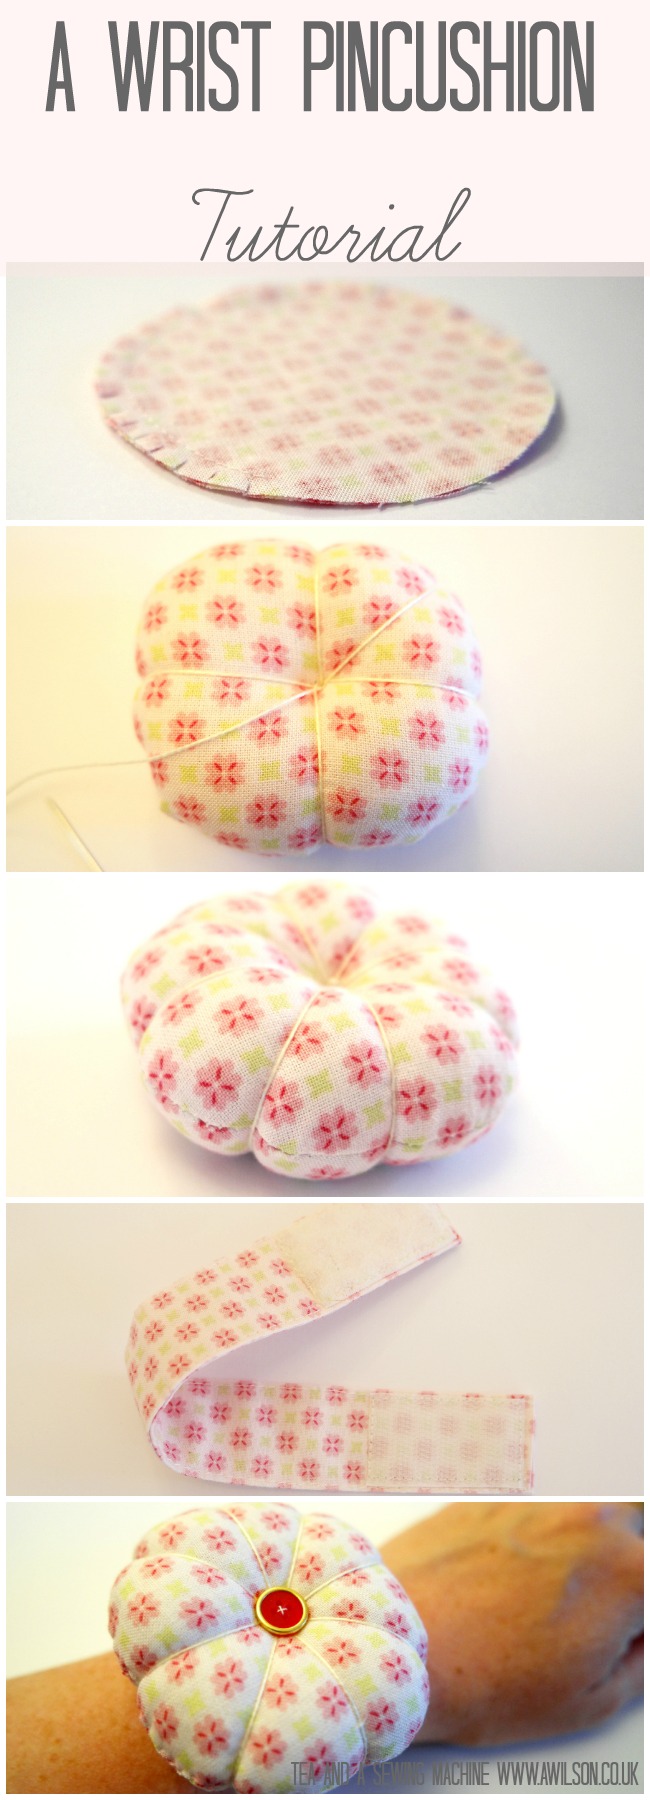 How to Make A Wrist Pincushion Easy Step By Step Sewing Tutorial/DIY Wrist  Pin Cushion from Scraps 